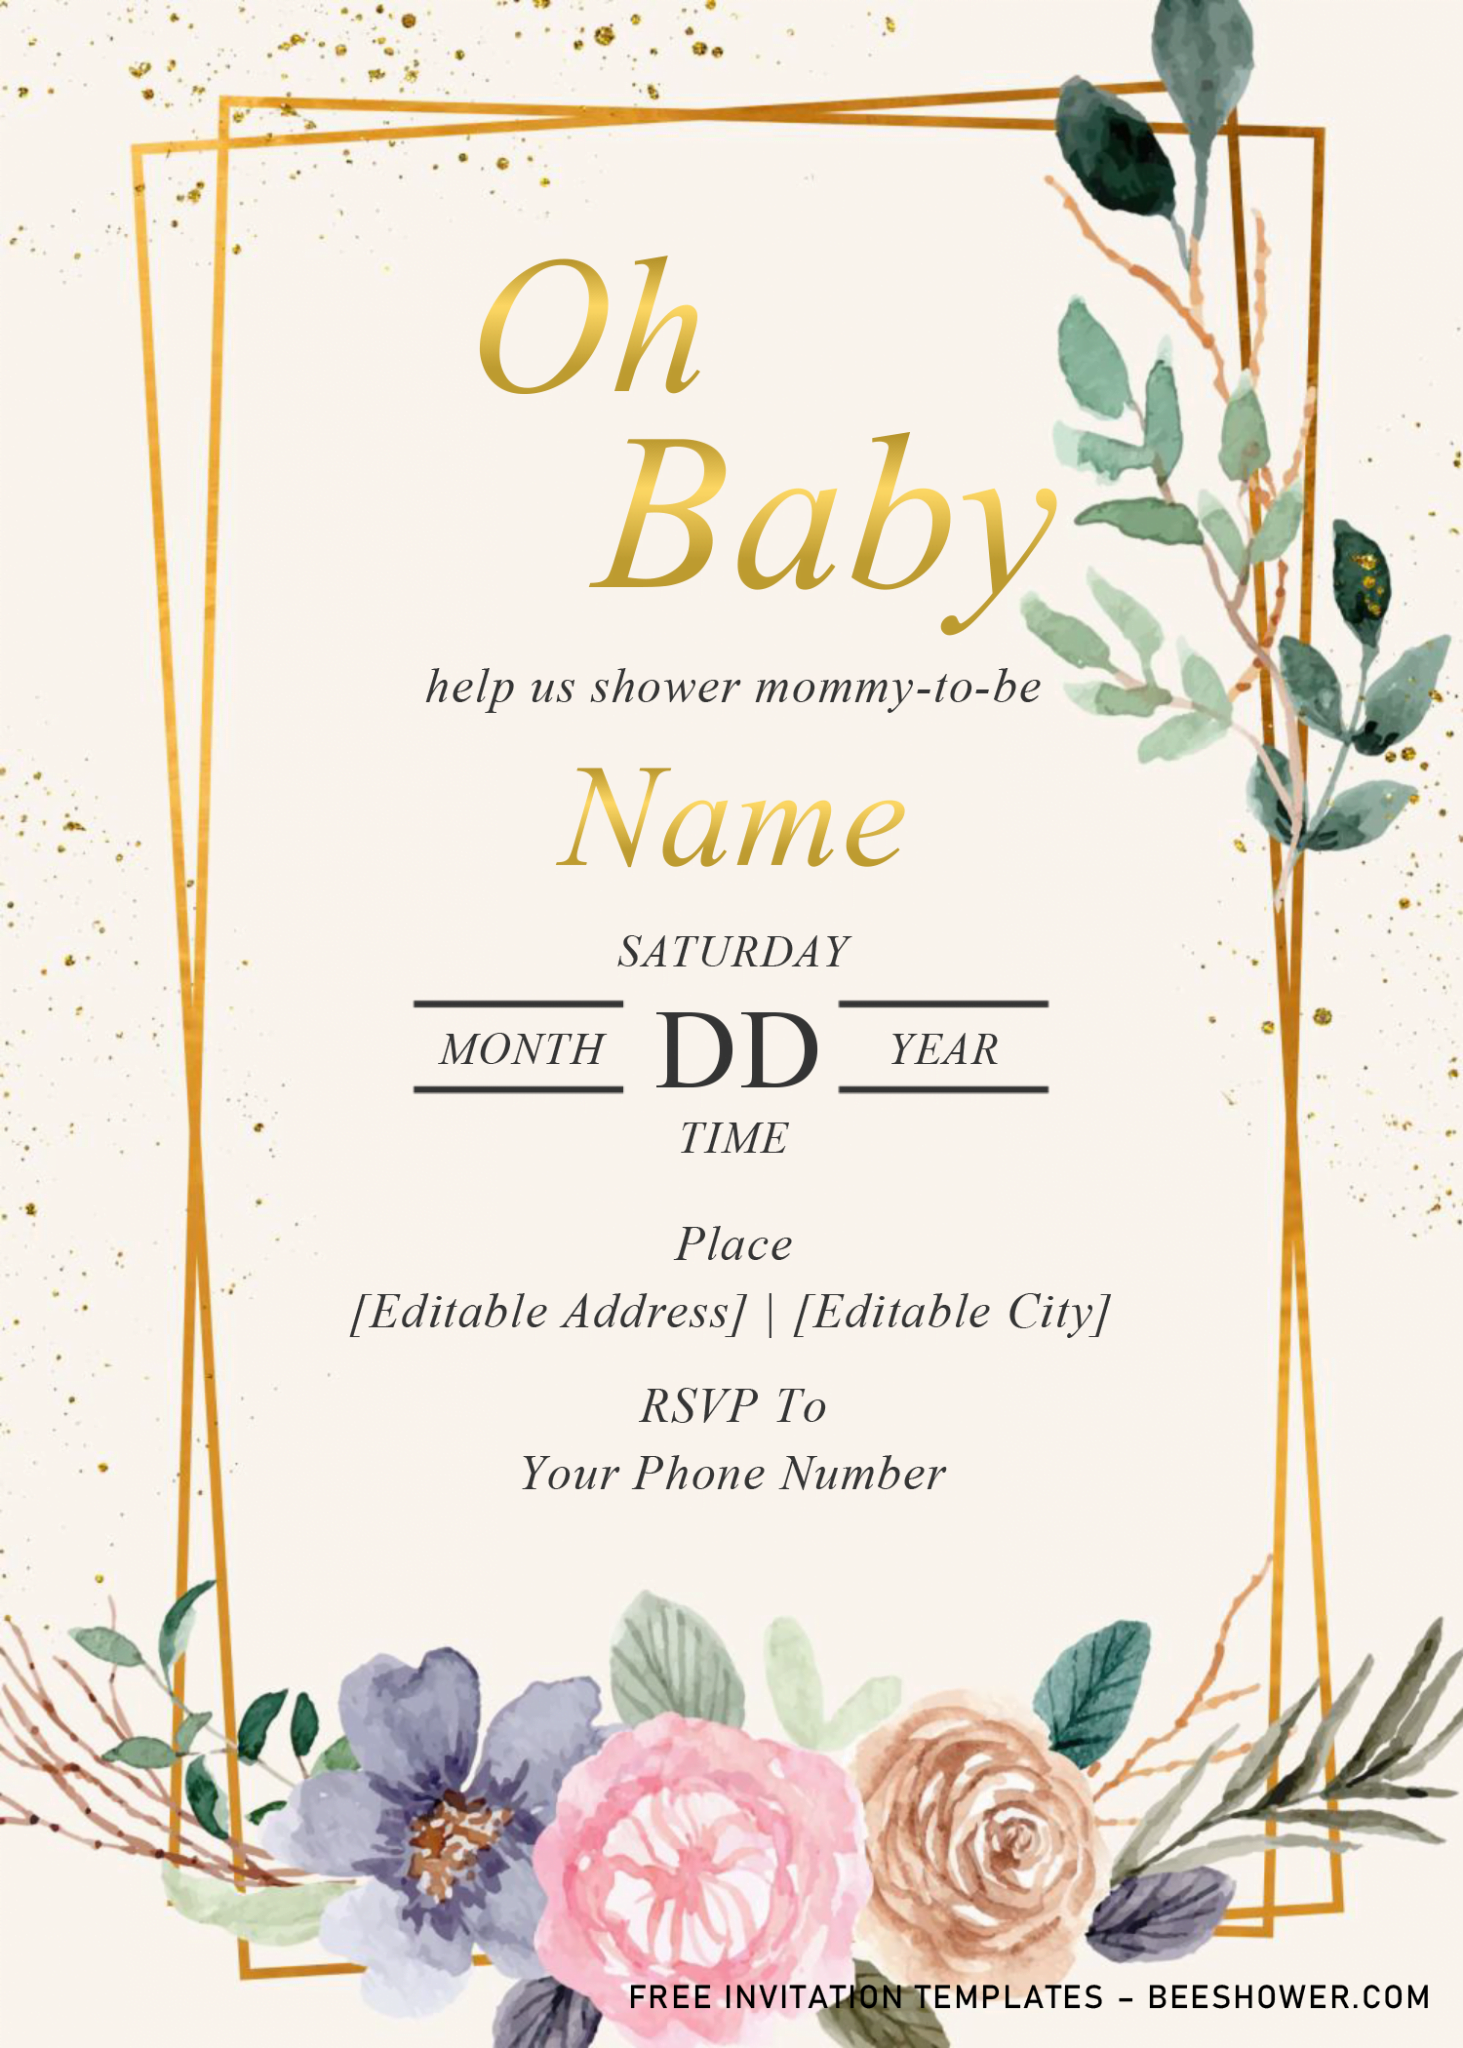 floral-and-geometric-baby-shower-invitation-templates-editable-with